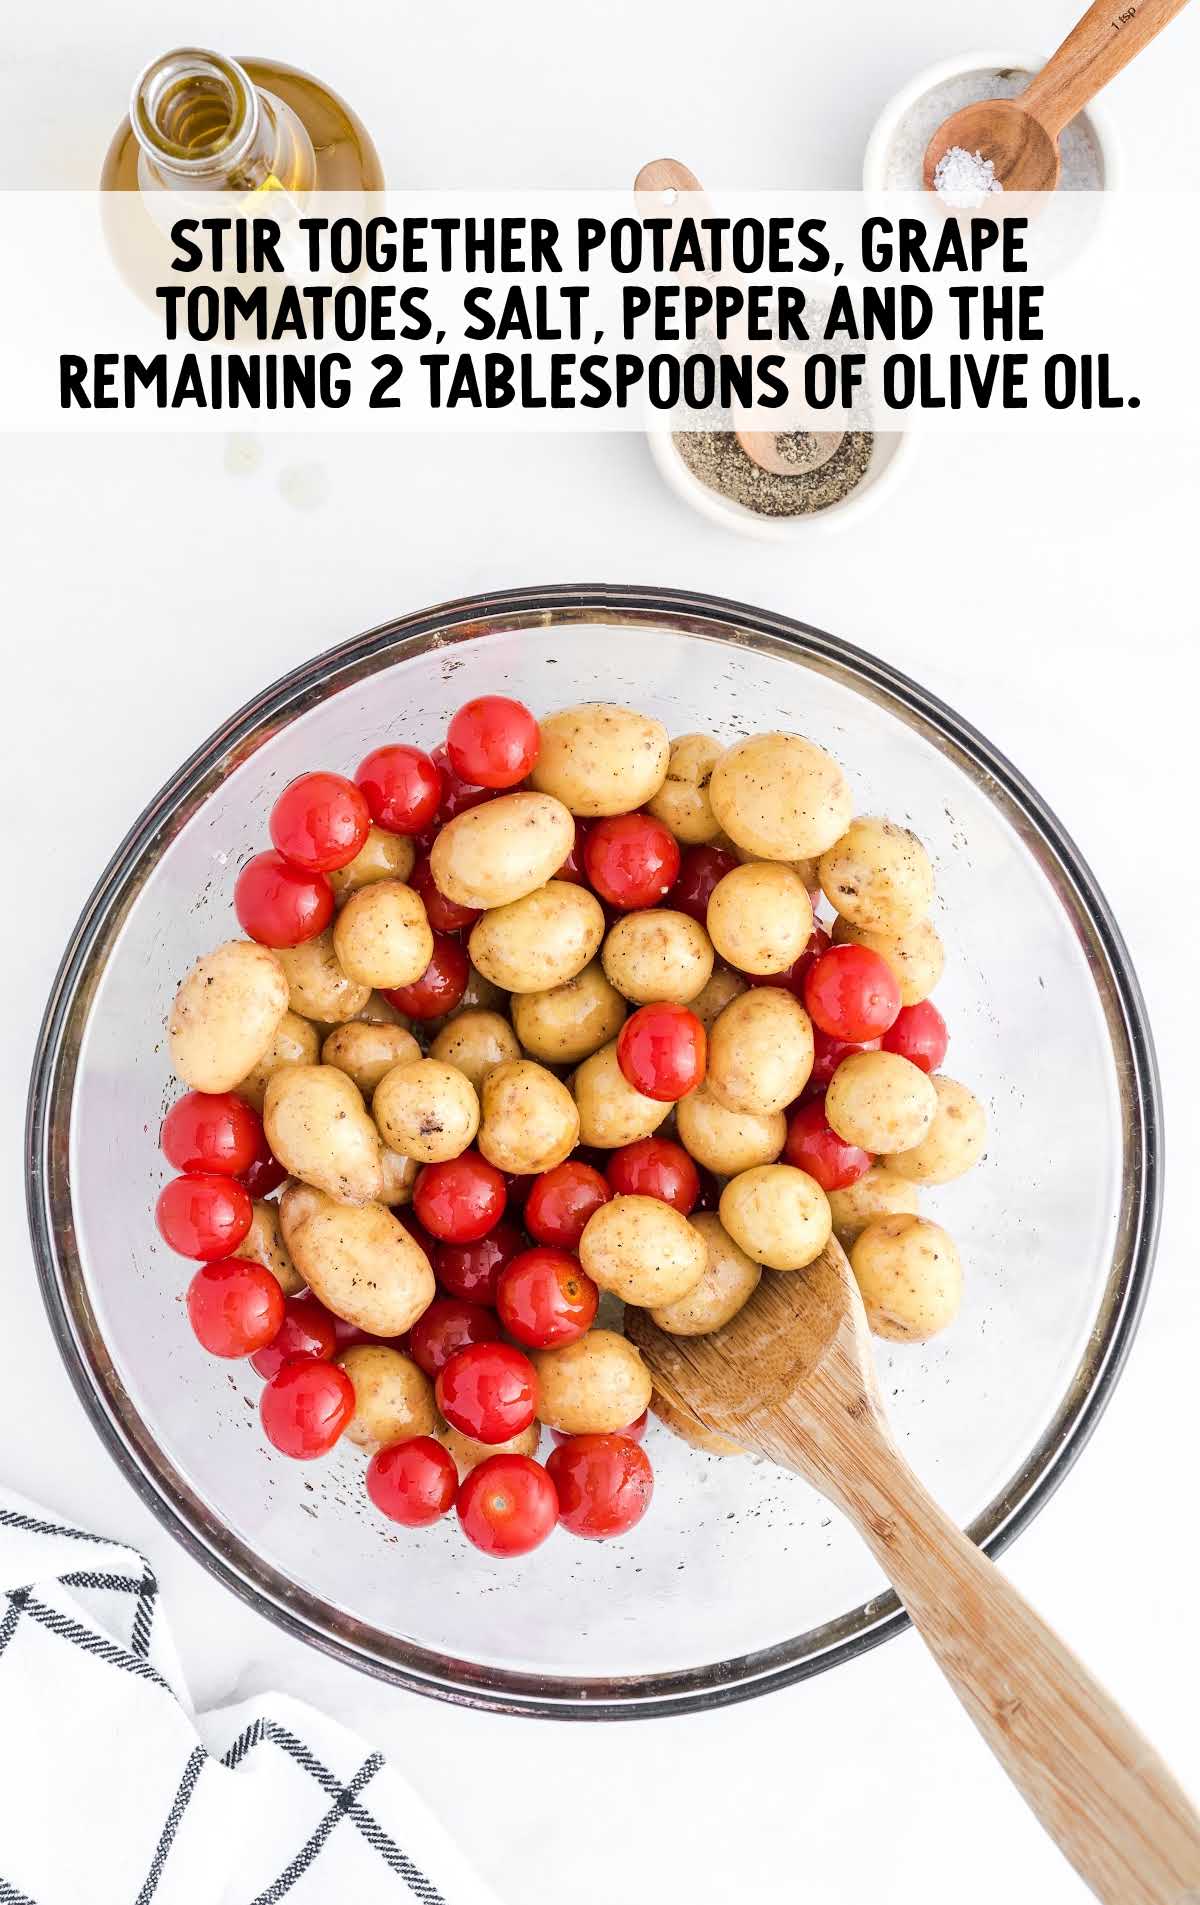 tomatoes and potatoes being combined in a bowl with olive oil